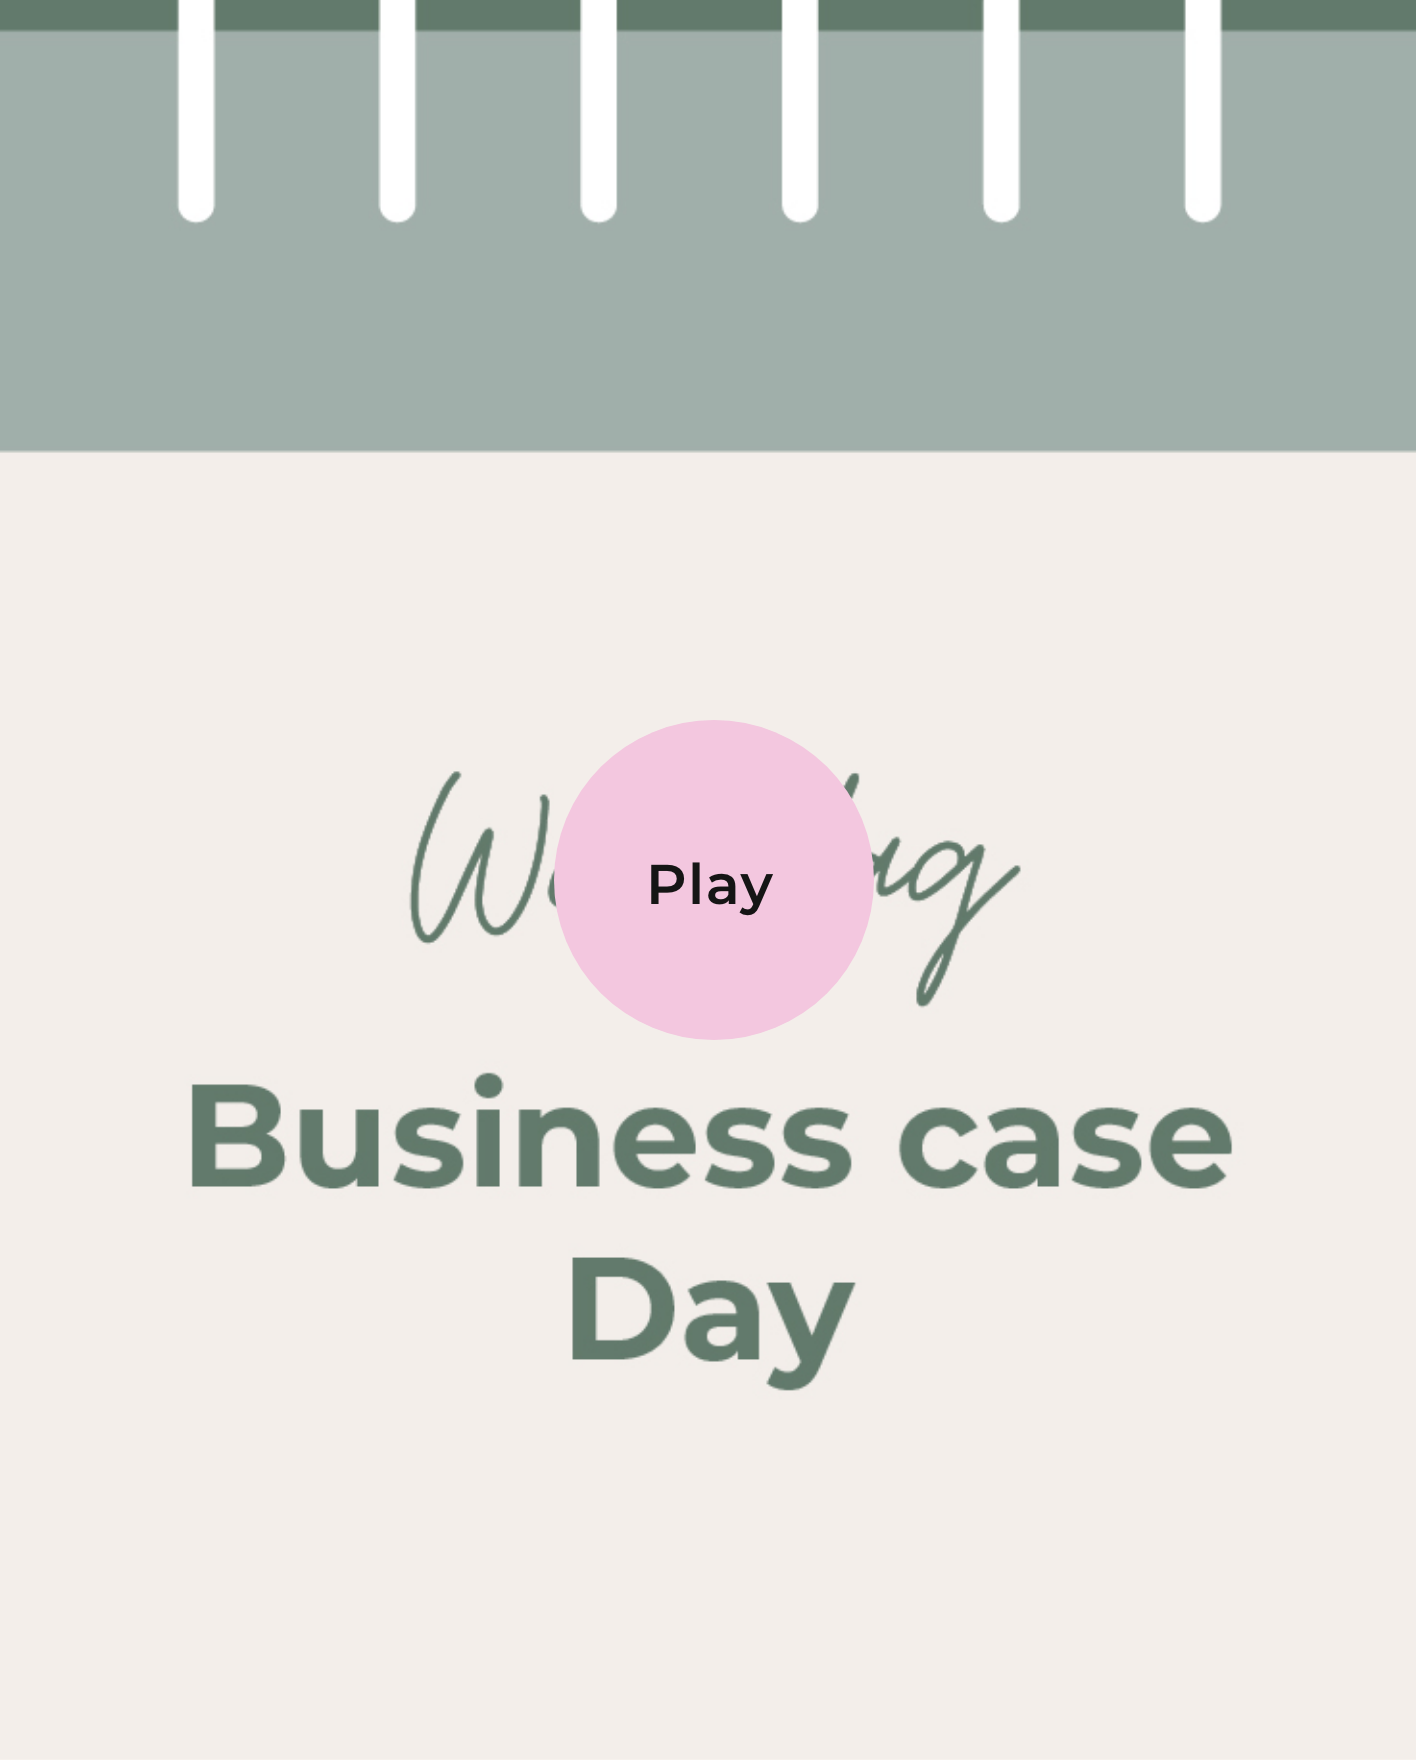 Woensdag business case day